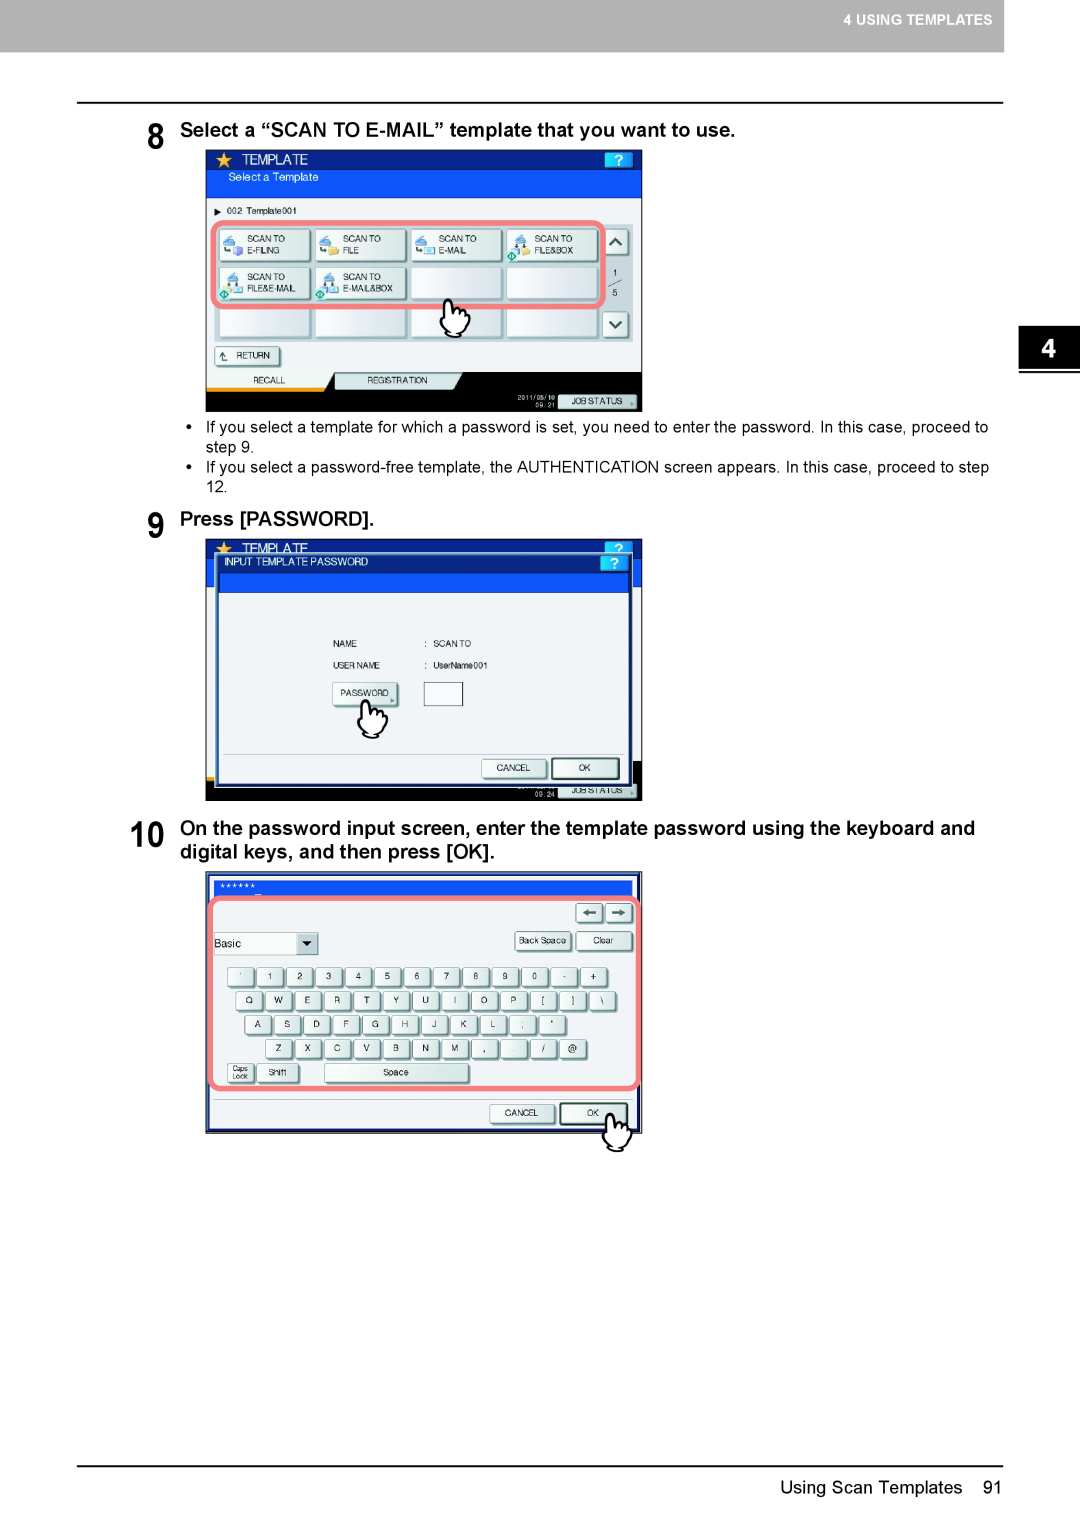 Toshiba 306SE, 556. 656, 856 Select a “SCAN TO E-MAIL” template that you want to use, Press PASSWORD, Using Scan Templates 